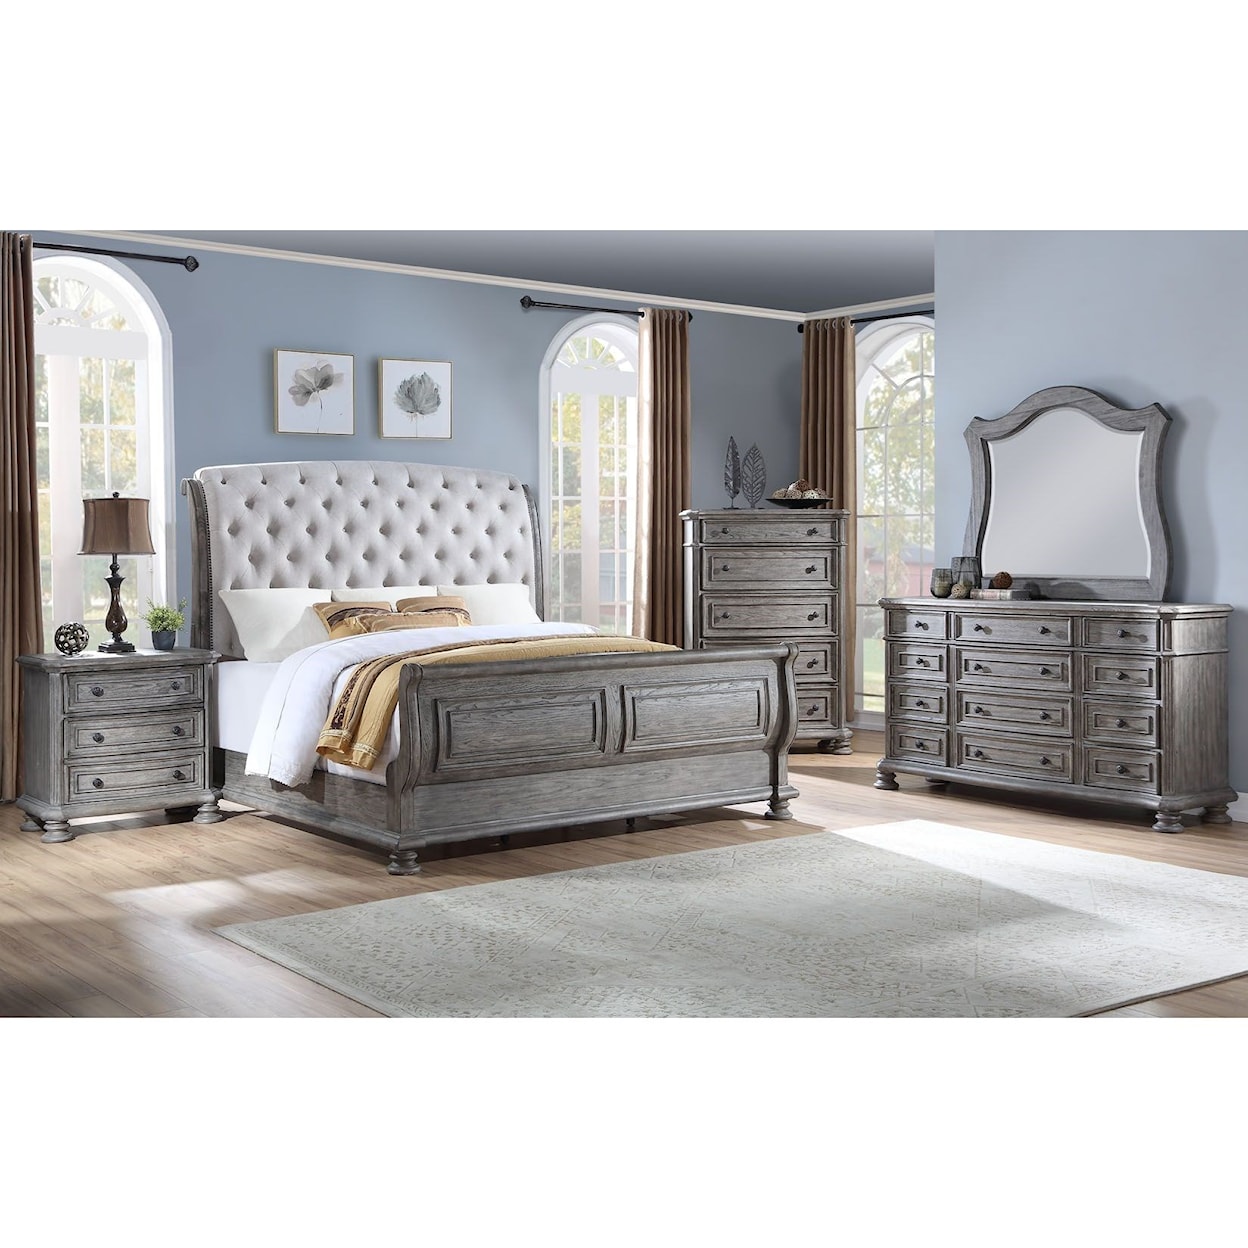 Avalon Furniture Lakeway Queen Bedroom Group